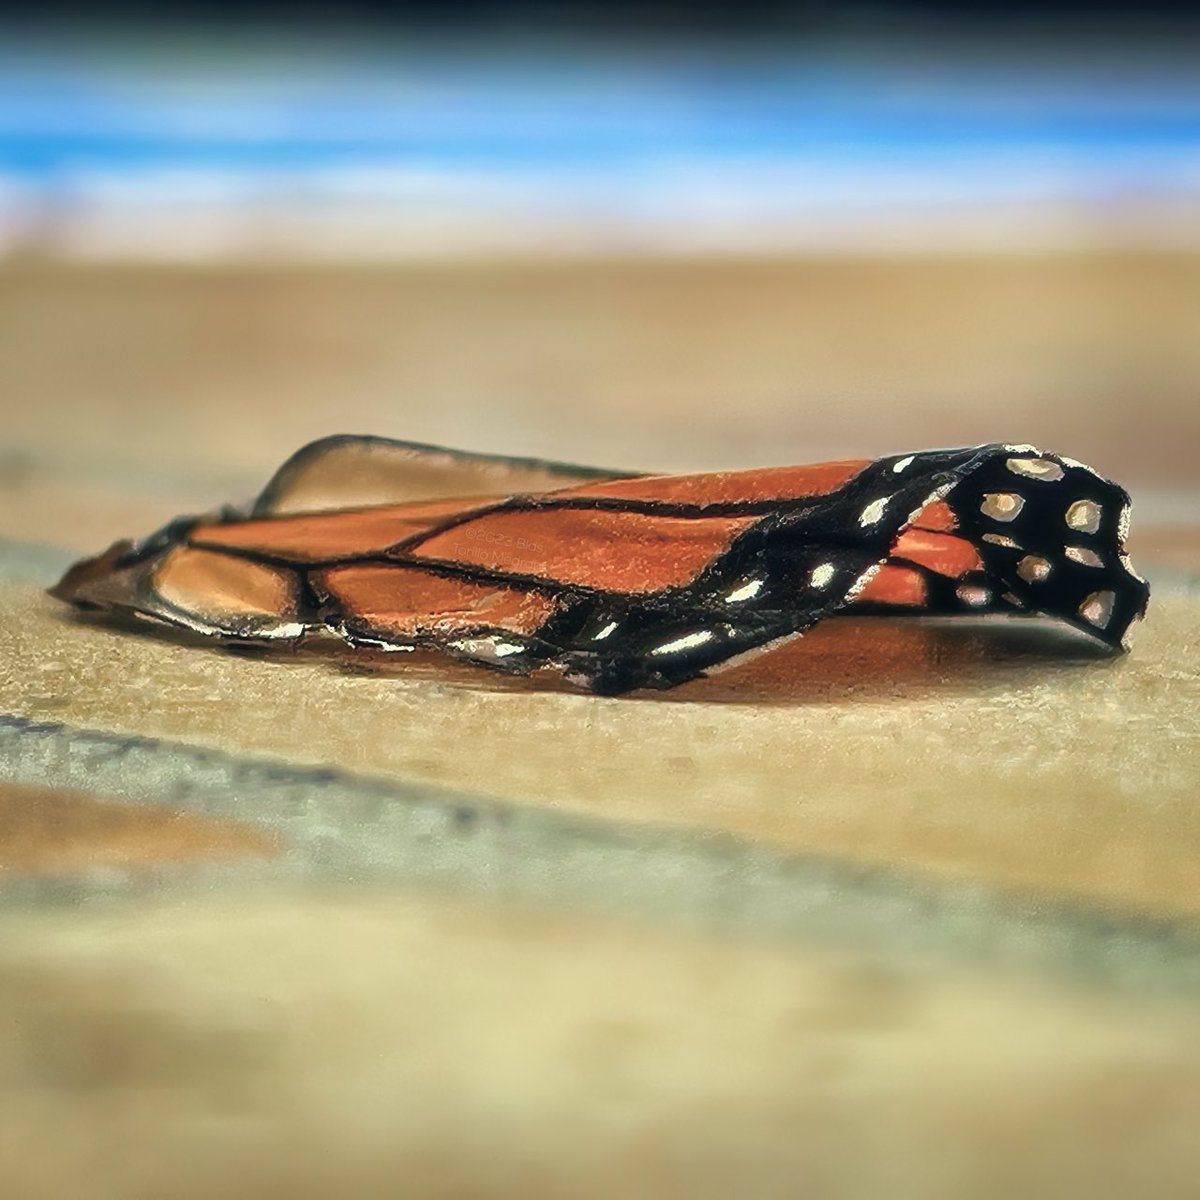 Winter is here.
___
IG: btorillo

#iPhonegraphy #México #Puebla #Ala #Nature #Colors #Wing #Butterfly #ButterflyWing #iPhone #Photo #Mexico #Belleza #Beauty #iPhone #Beautiful #PhotoOfTheDay #FineArt #iPhoneArt #Art #ArtPhotography #iPhone13Pro